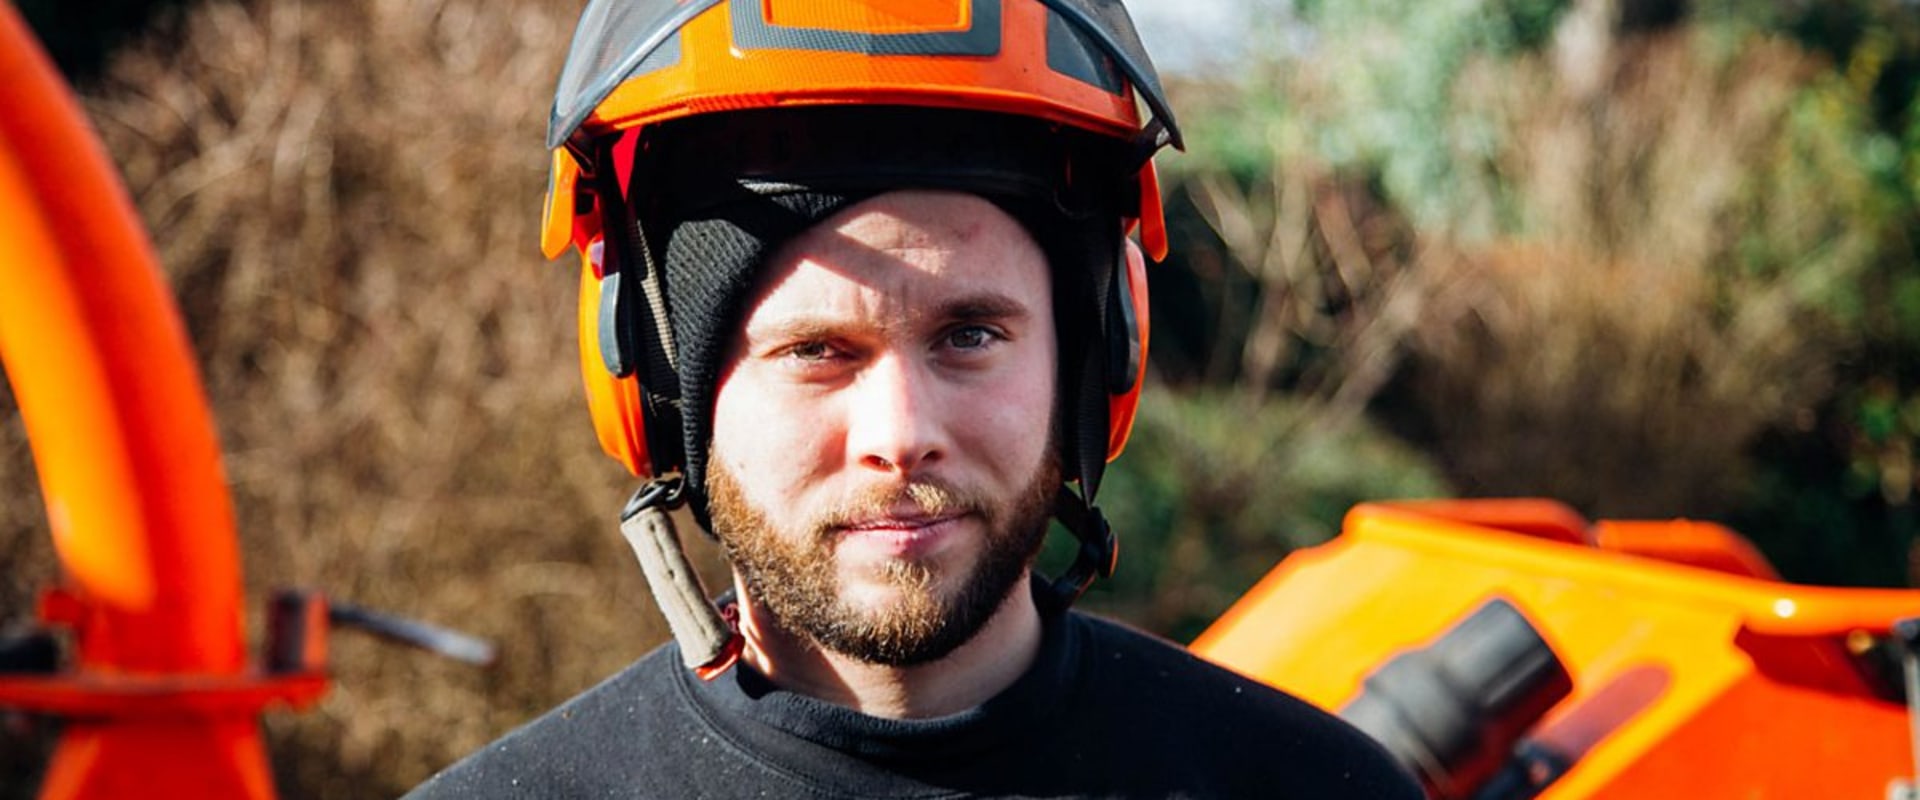 How much does a uk tree surgeon earn?